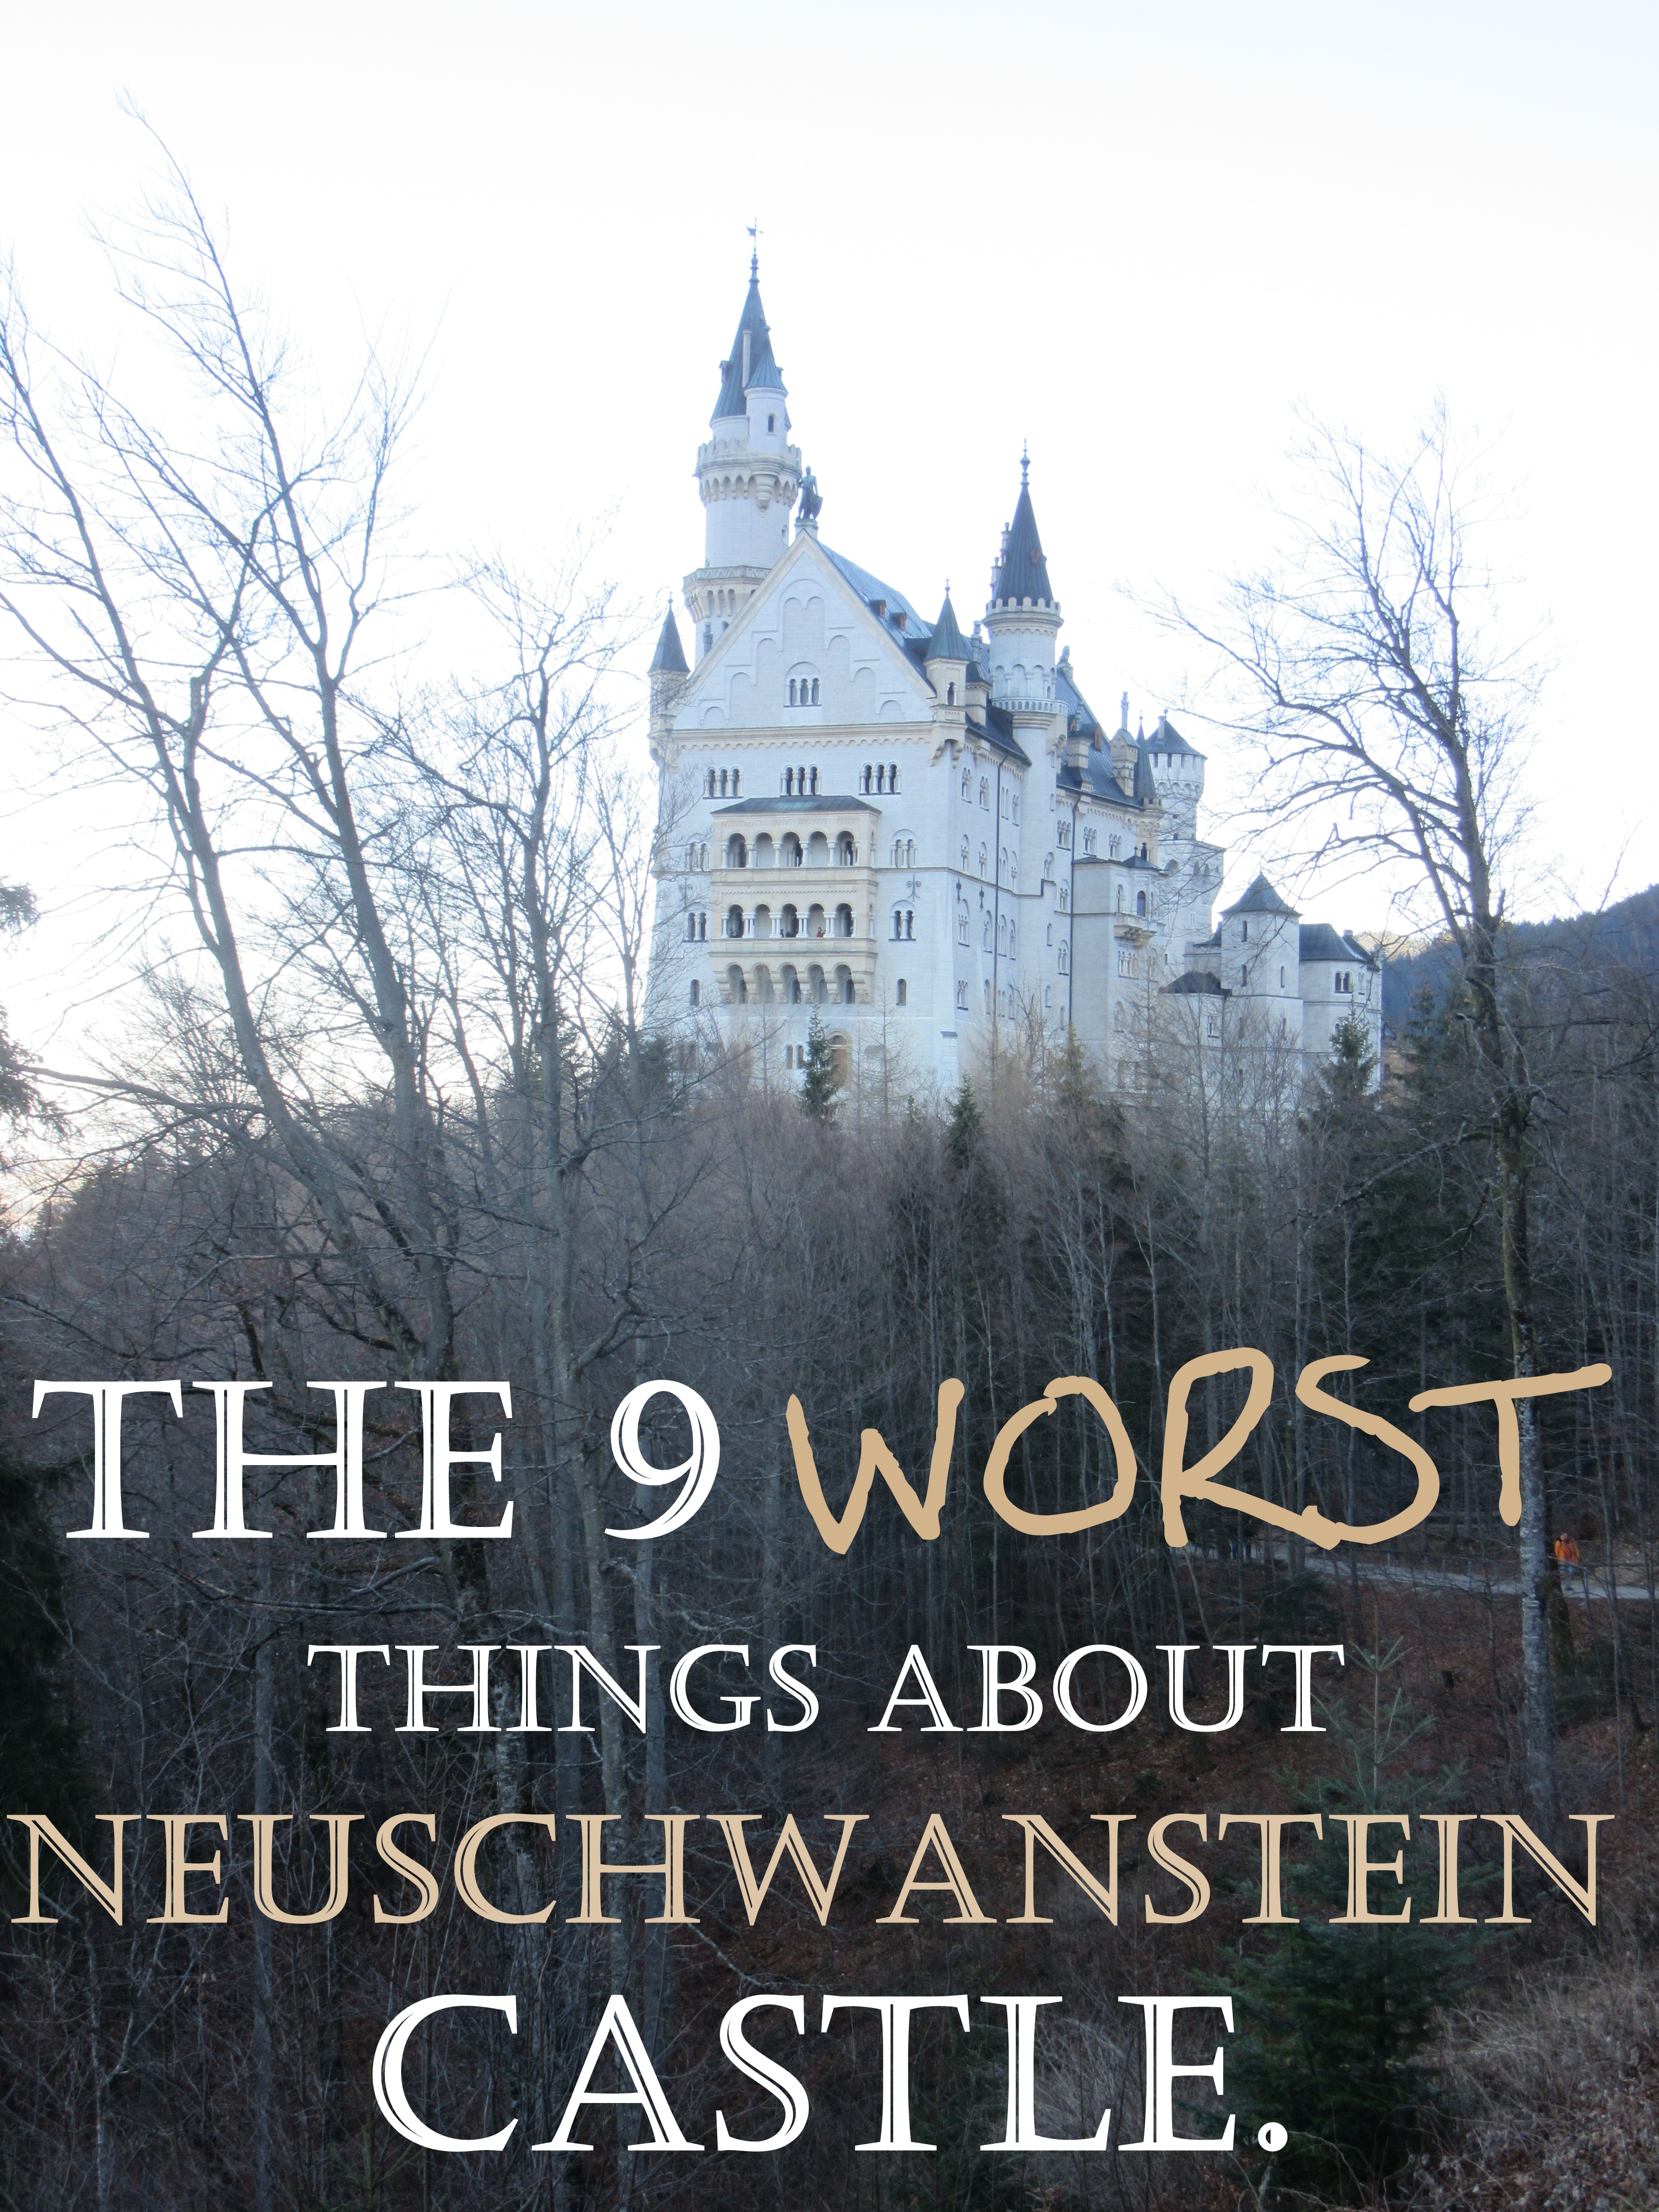 The 9 Worst Things About Neuschwanstein Castle Bathroom neuschwanstein castle inside